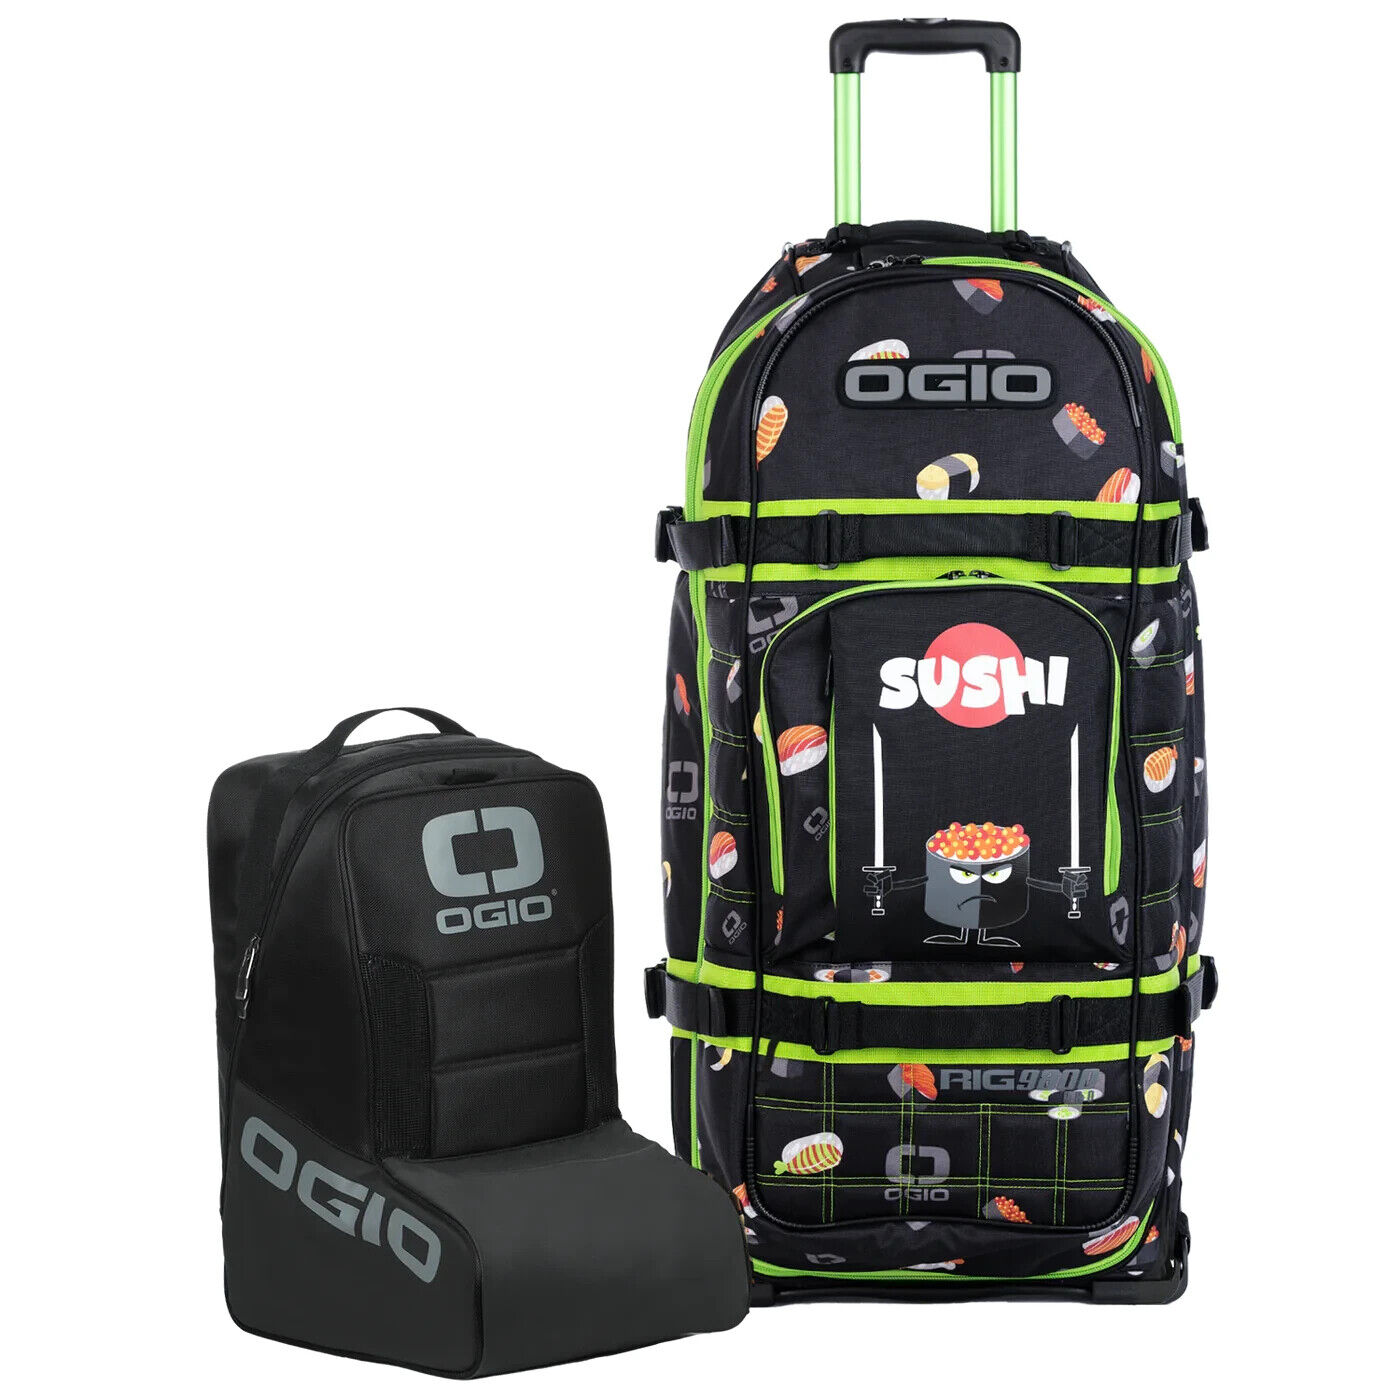 OGIO RIG 9800 PRO Sushi Gearbag with Boot Bag MX Offroad Luggage 34x16x15